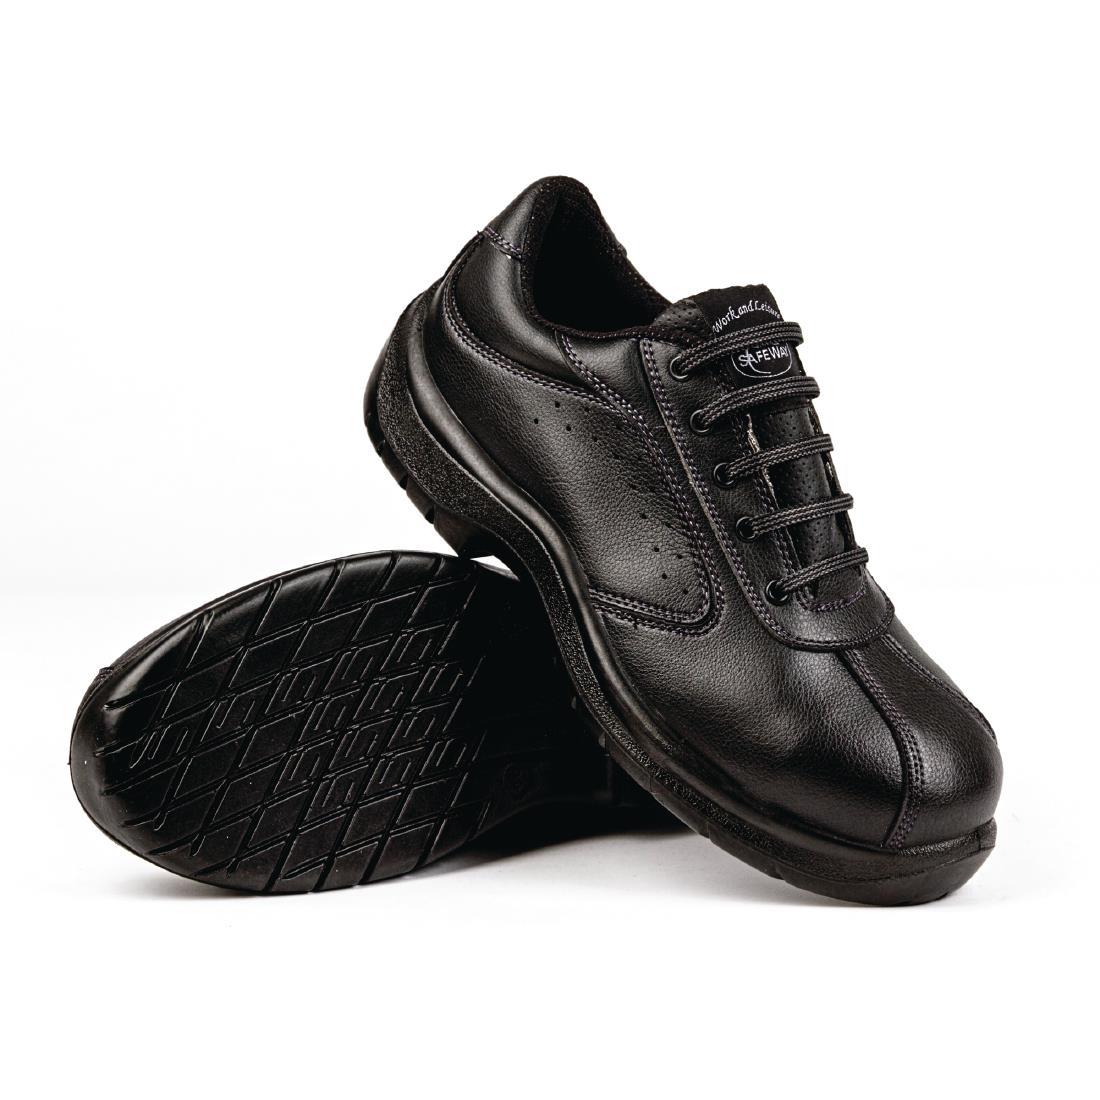 Slipbuster Side Perforated Lace Up Black 40